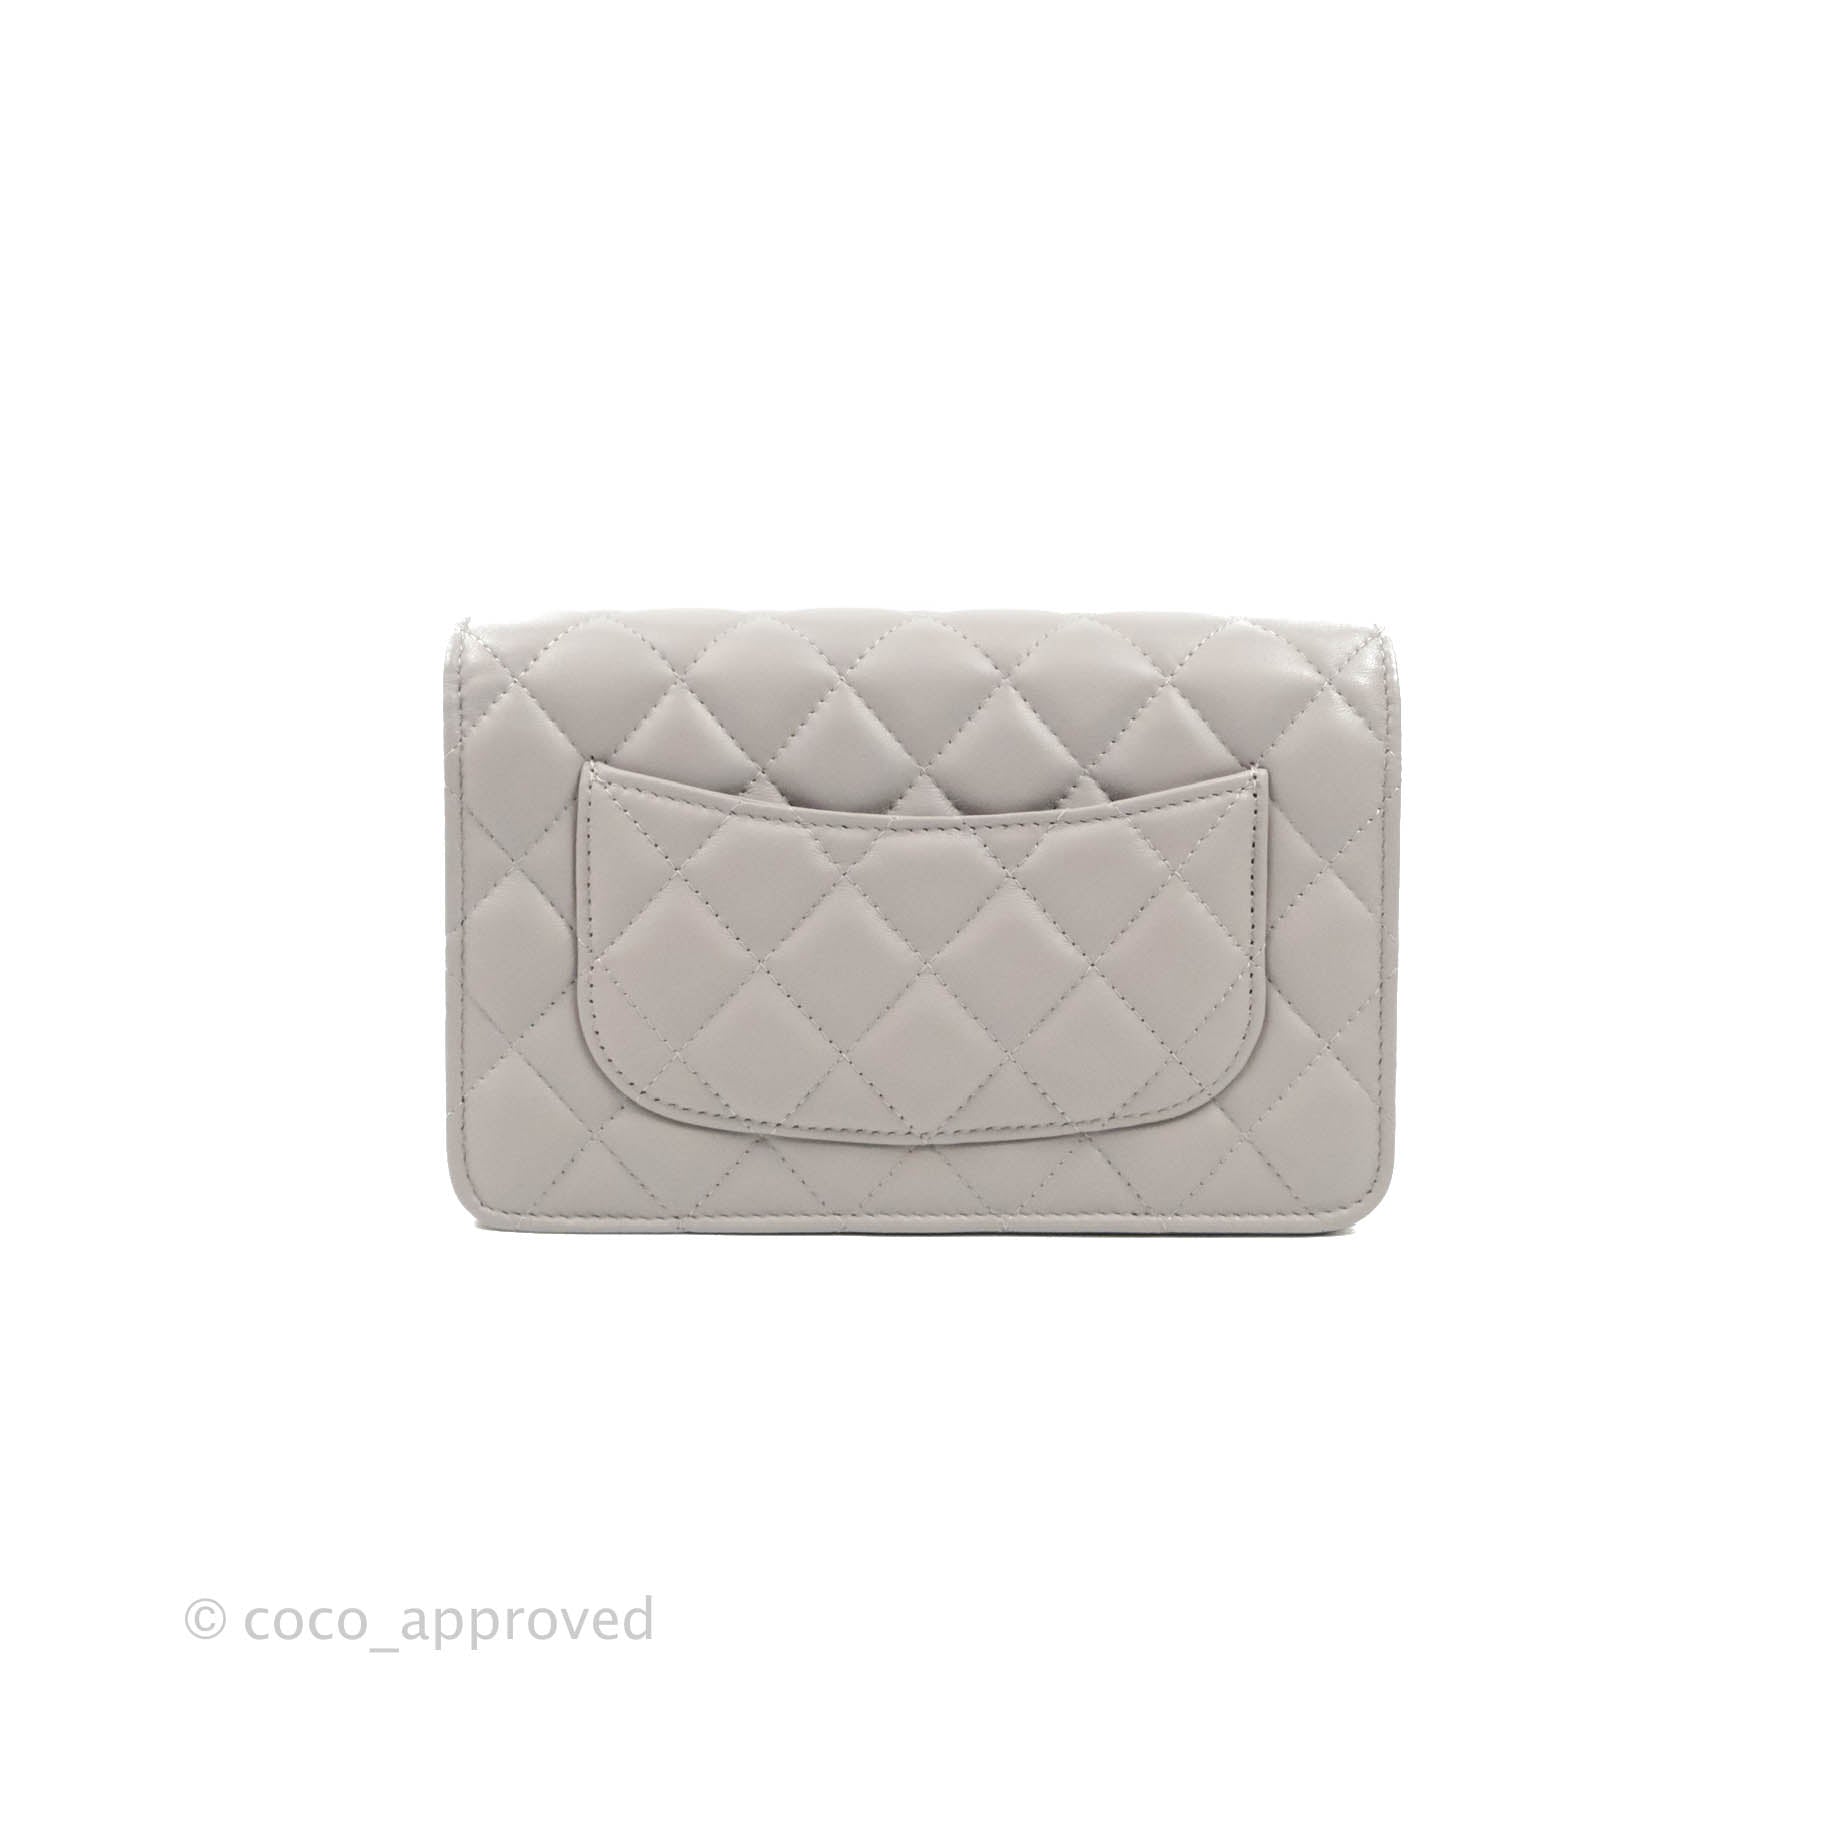 Chanel Silver And Pink Gradient Metallic Quilted Lambskin WOC